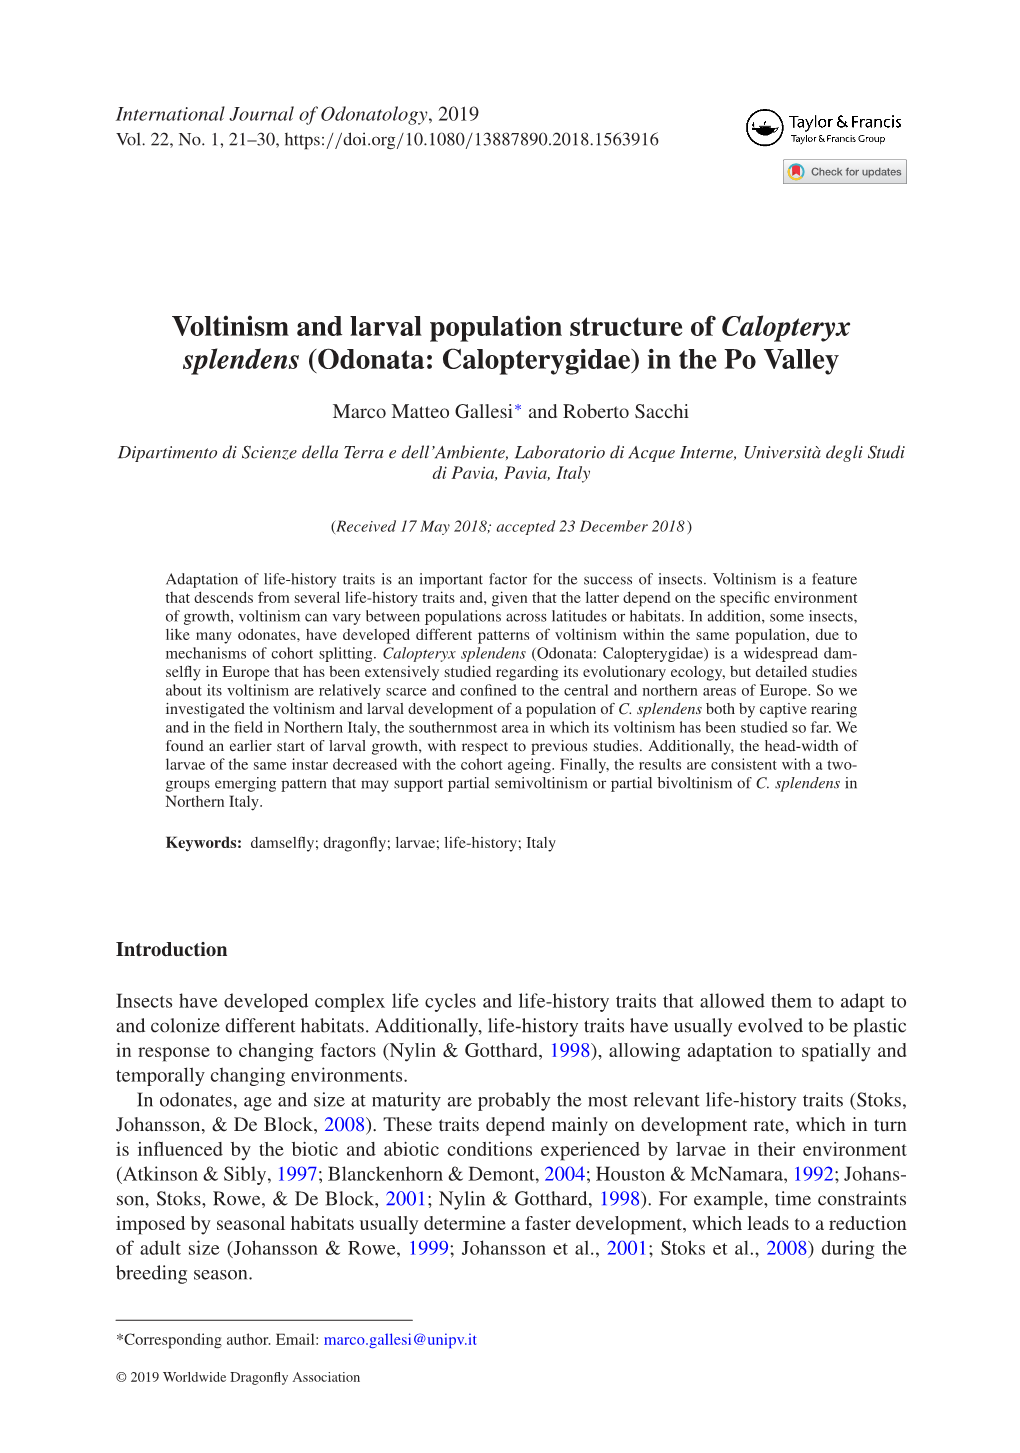 Voltinism and Larval Population Structure of Calopteryx Splendens (Odonata: Calopterygidae) in the Po Valley